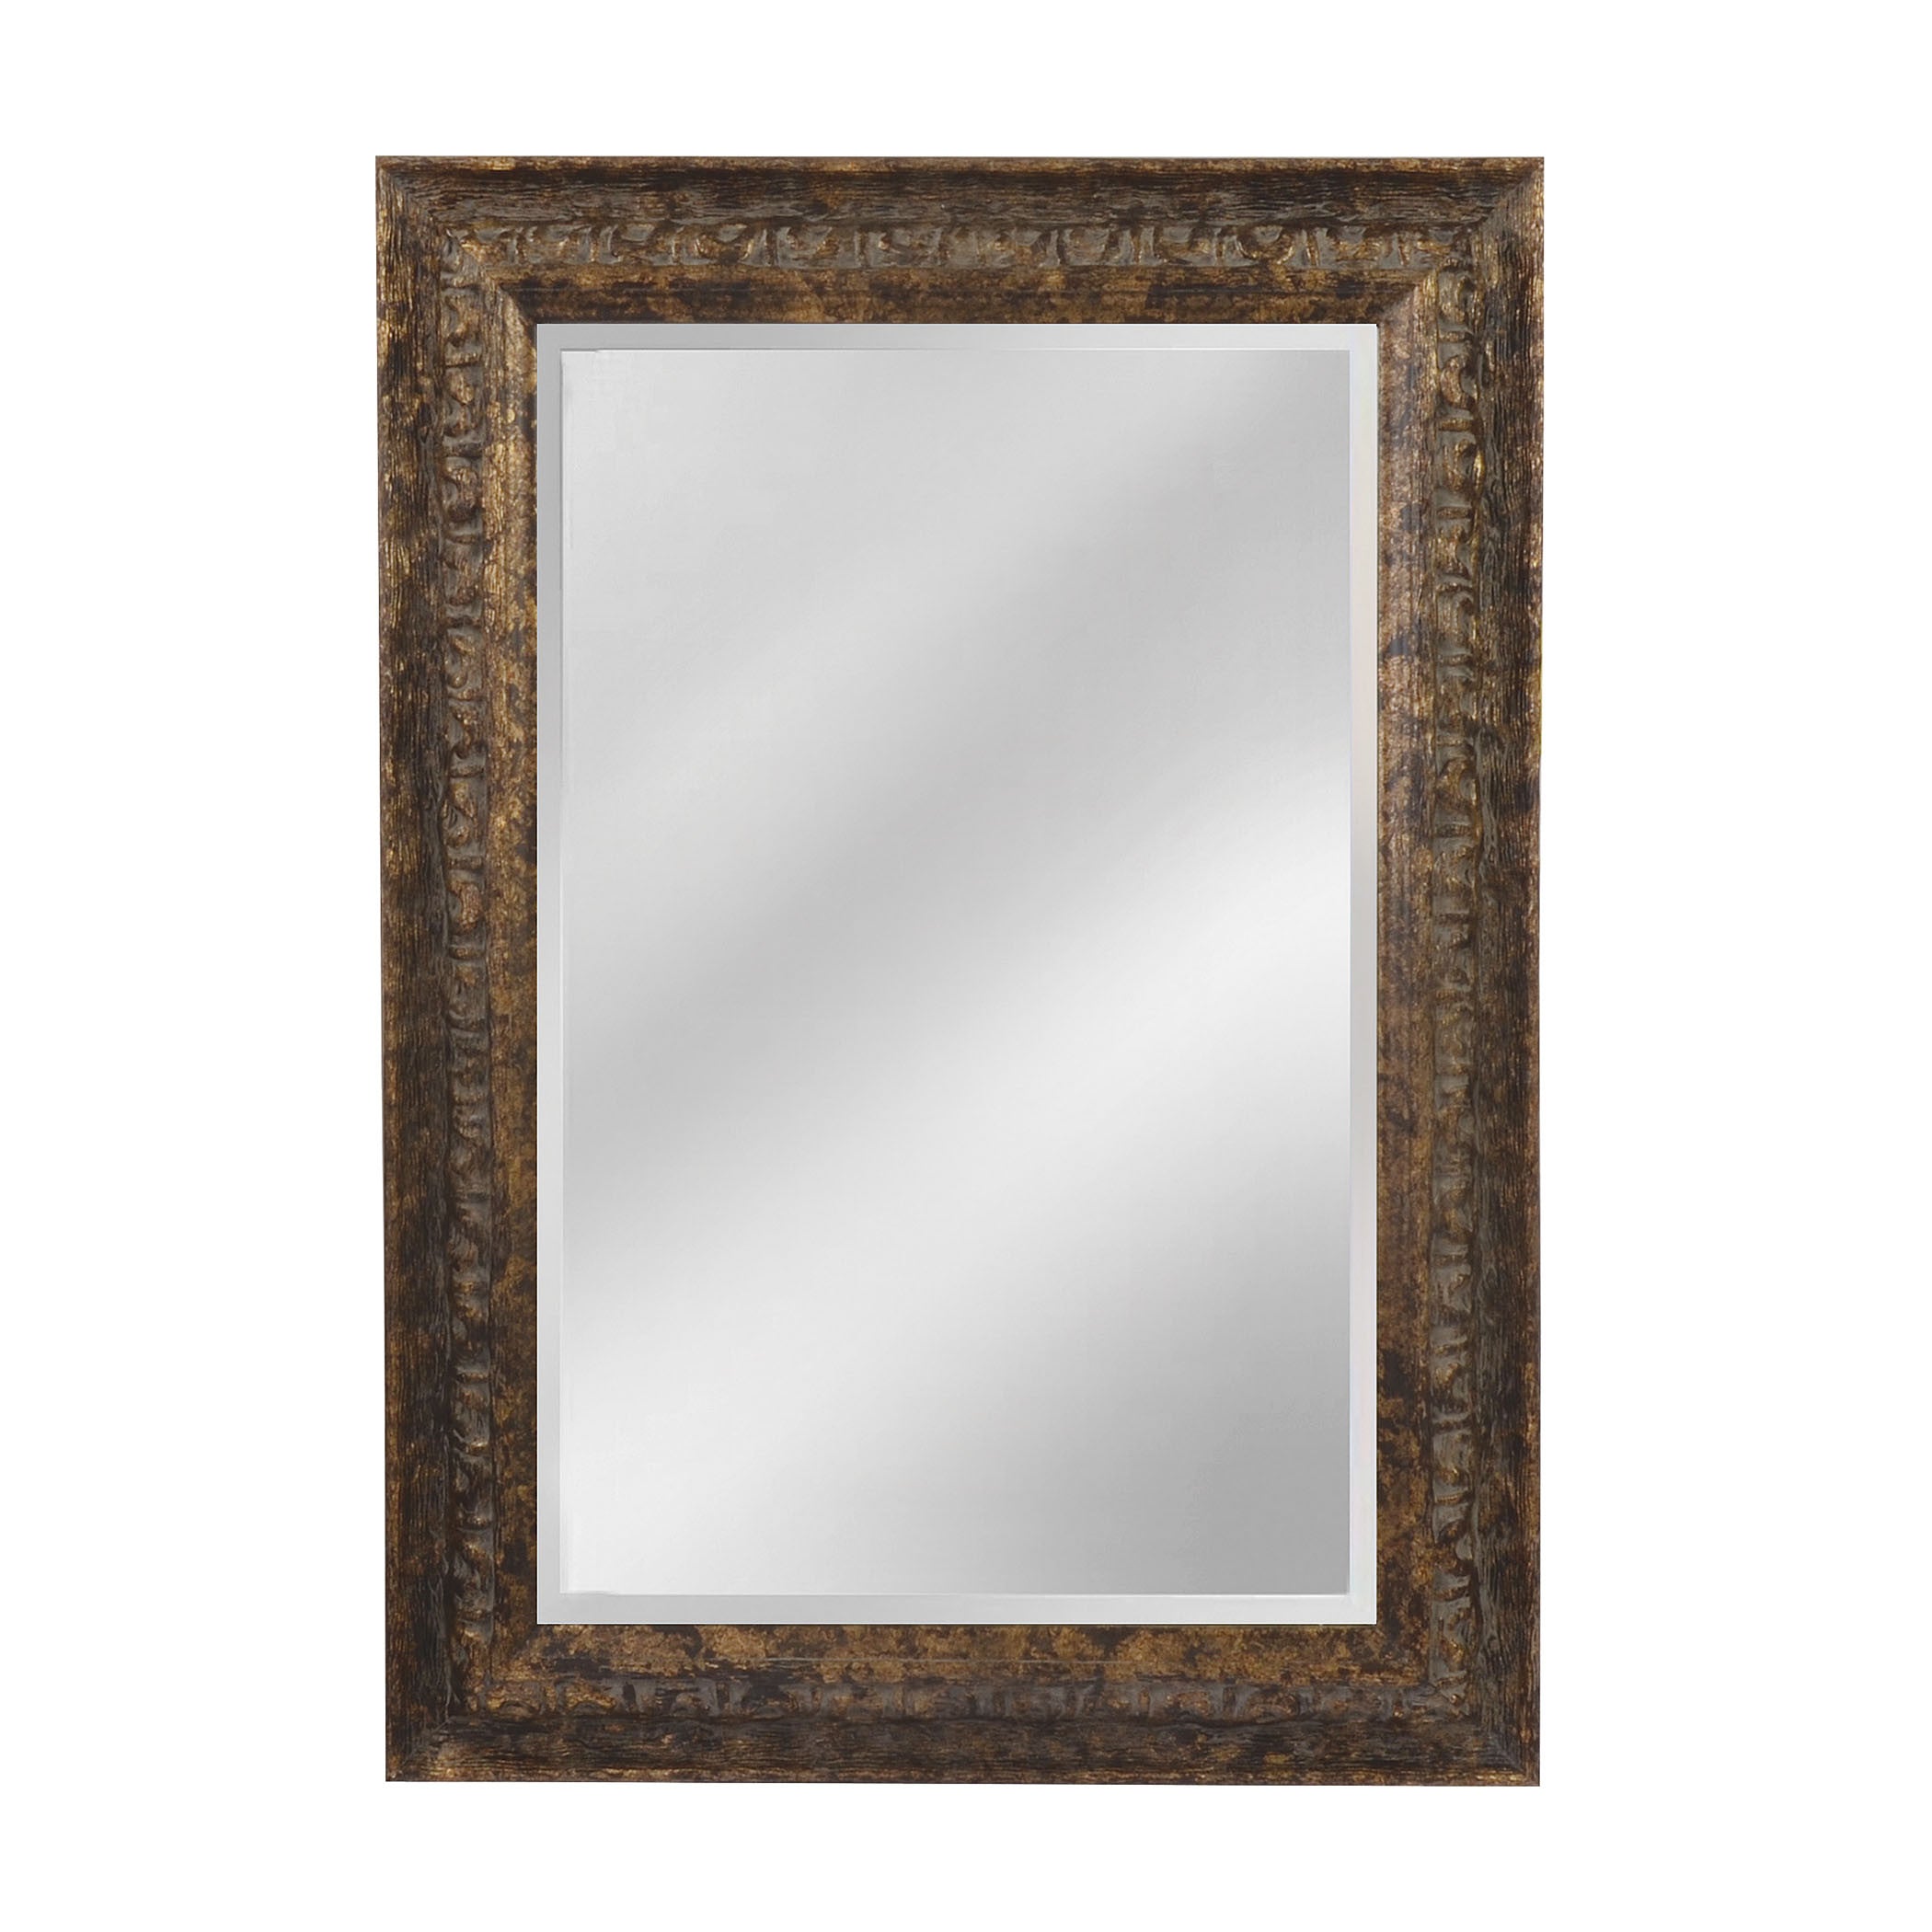 Mirror Masters Mw4031b-0032 North Wales Collection Tortoise Shell Finish Wall Mirror